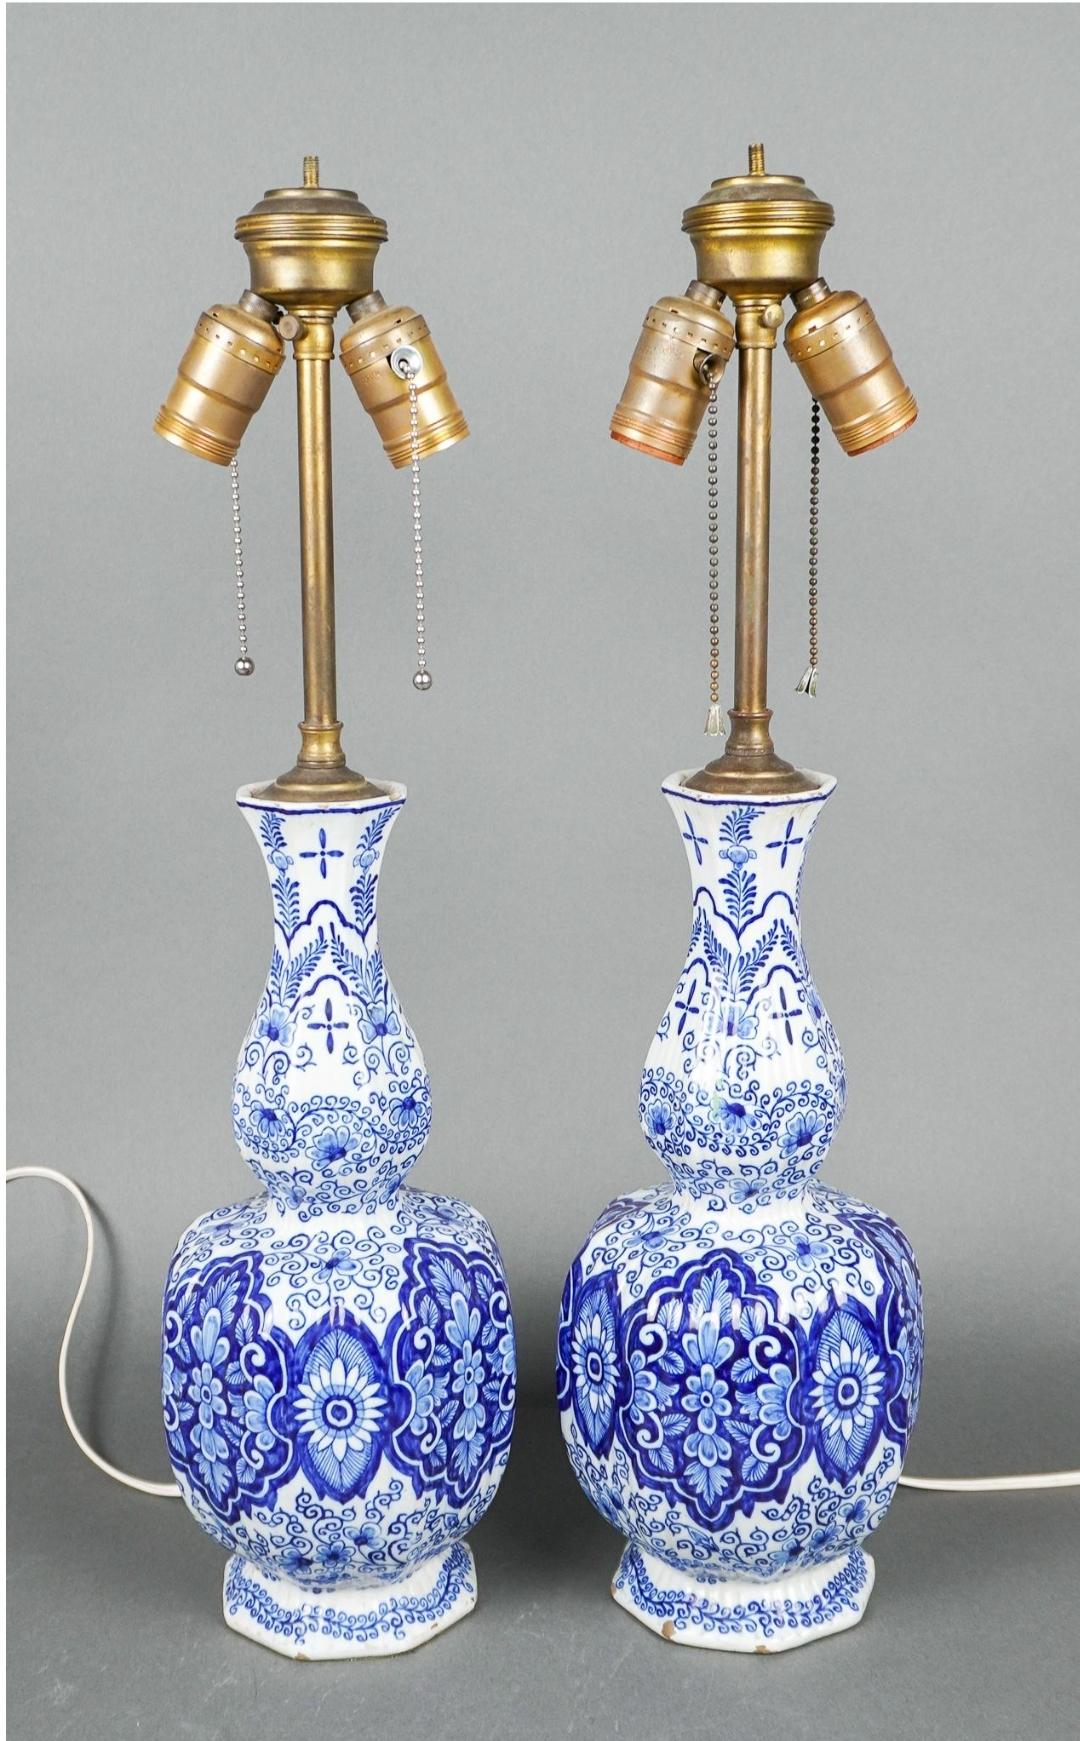 An extremely rare, superb large pair of antique 18th-century Dutch Delft faience knobble vases mounted as lamps, circa 1770s by Van Duijn.
A classic blue and white color palette adorns this abundantly flowers decorated lamp mounted vases. These